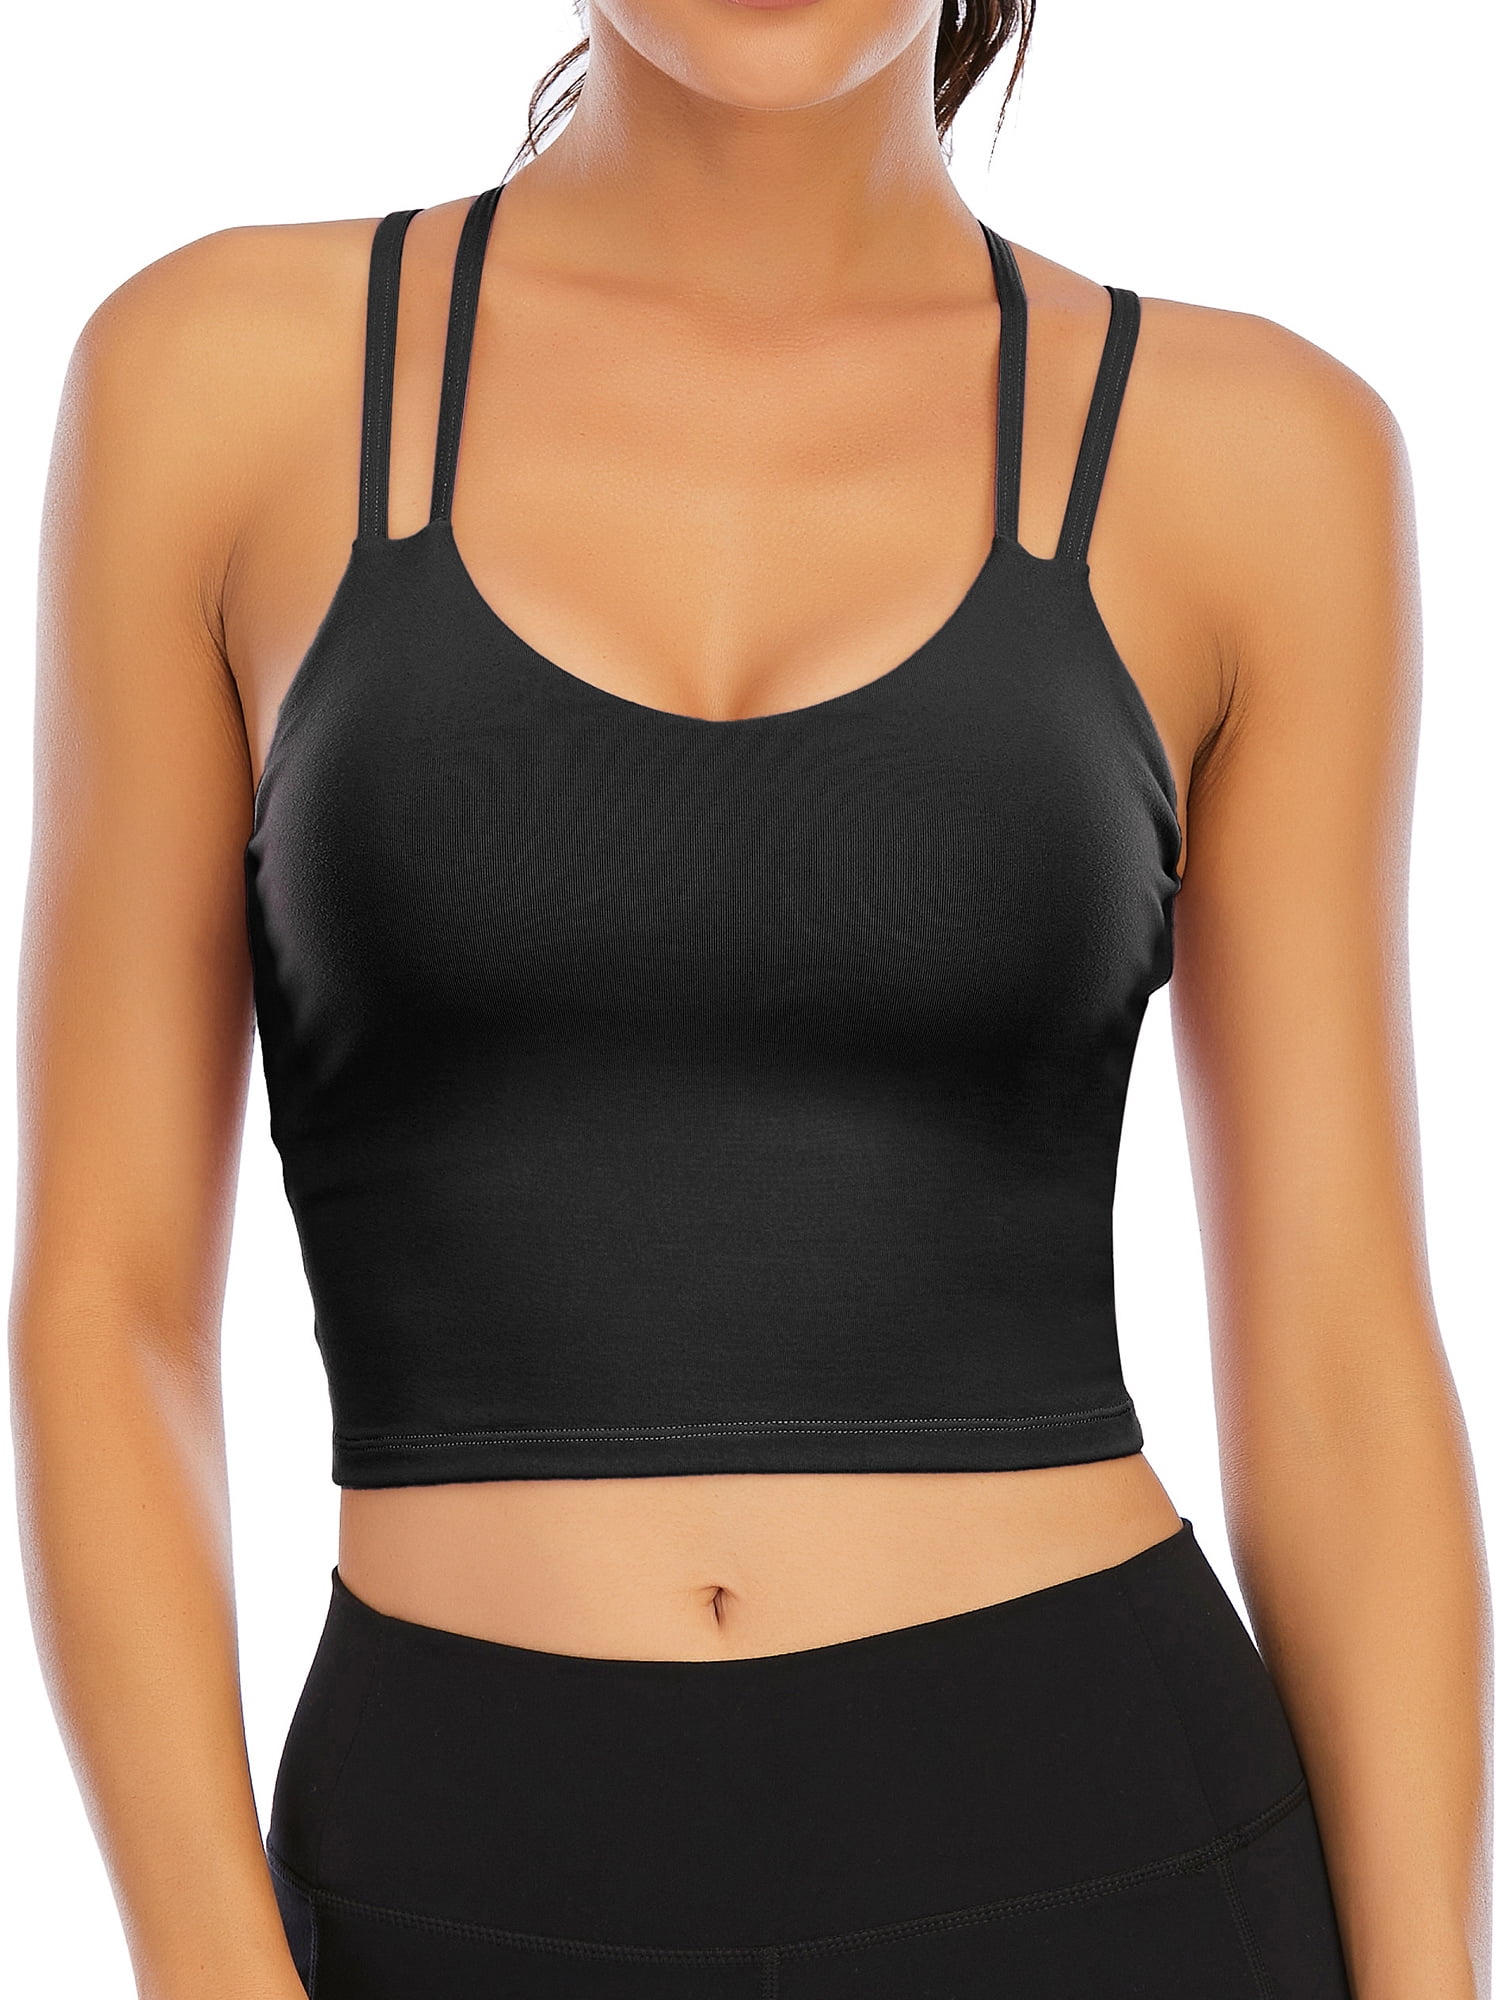 Buy Youloveit Sports Bras for Women Padded Longline Yoga Cami Crop Tank  Tops with Built-in Bra(S,White) at